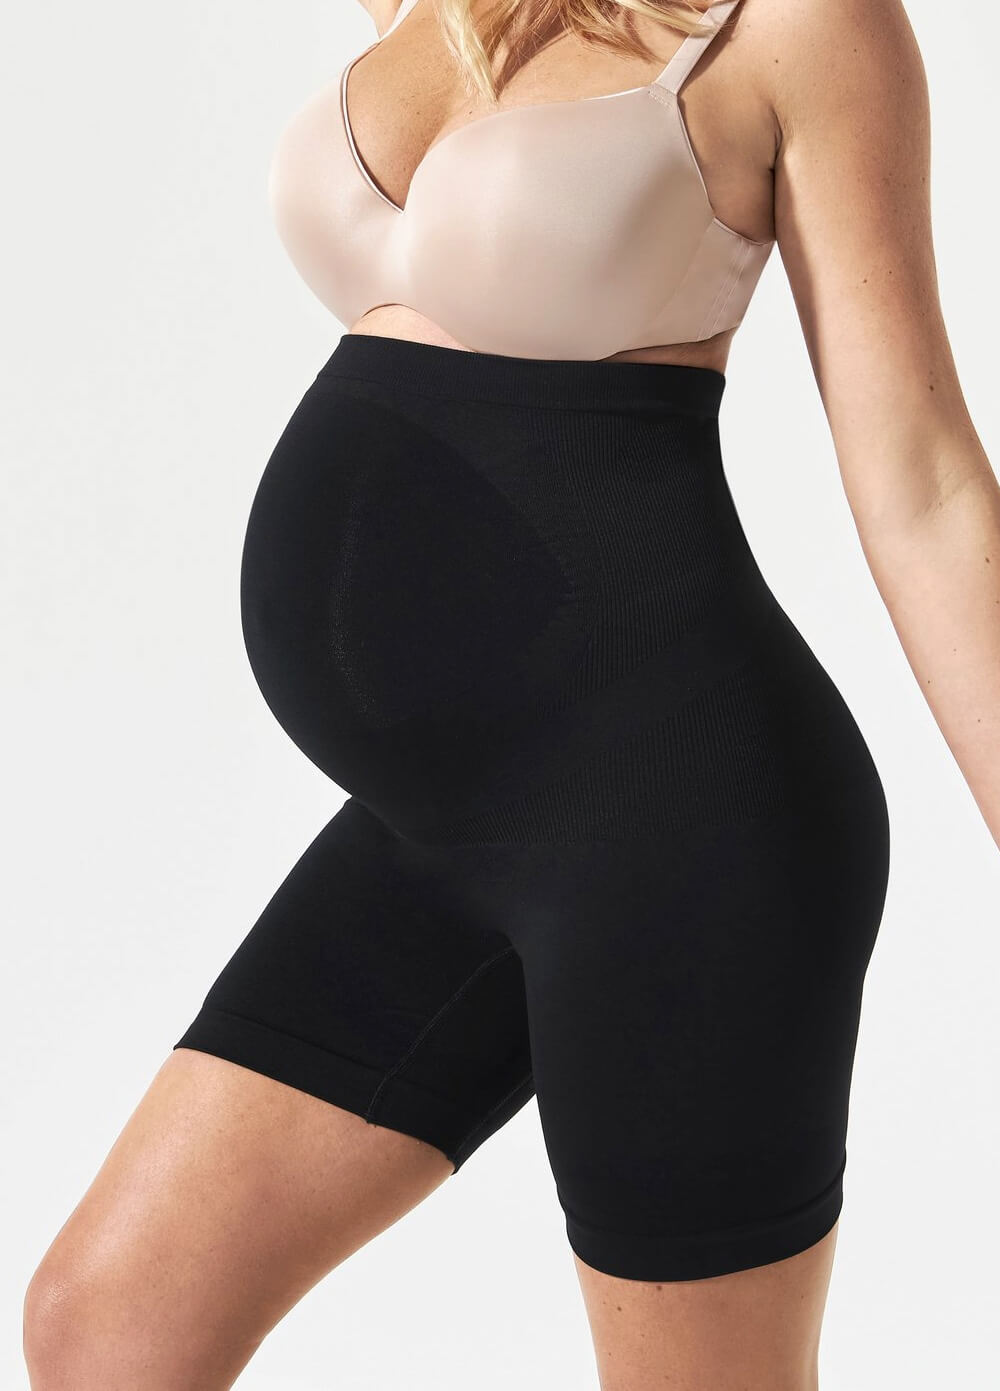 Everyday Belly Support Maternity Girlshort in Black by Blanqi